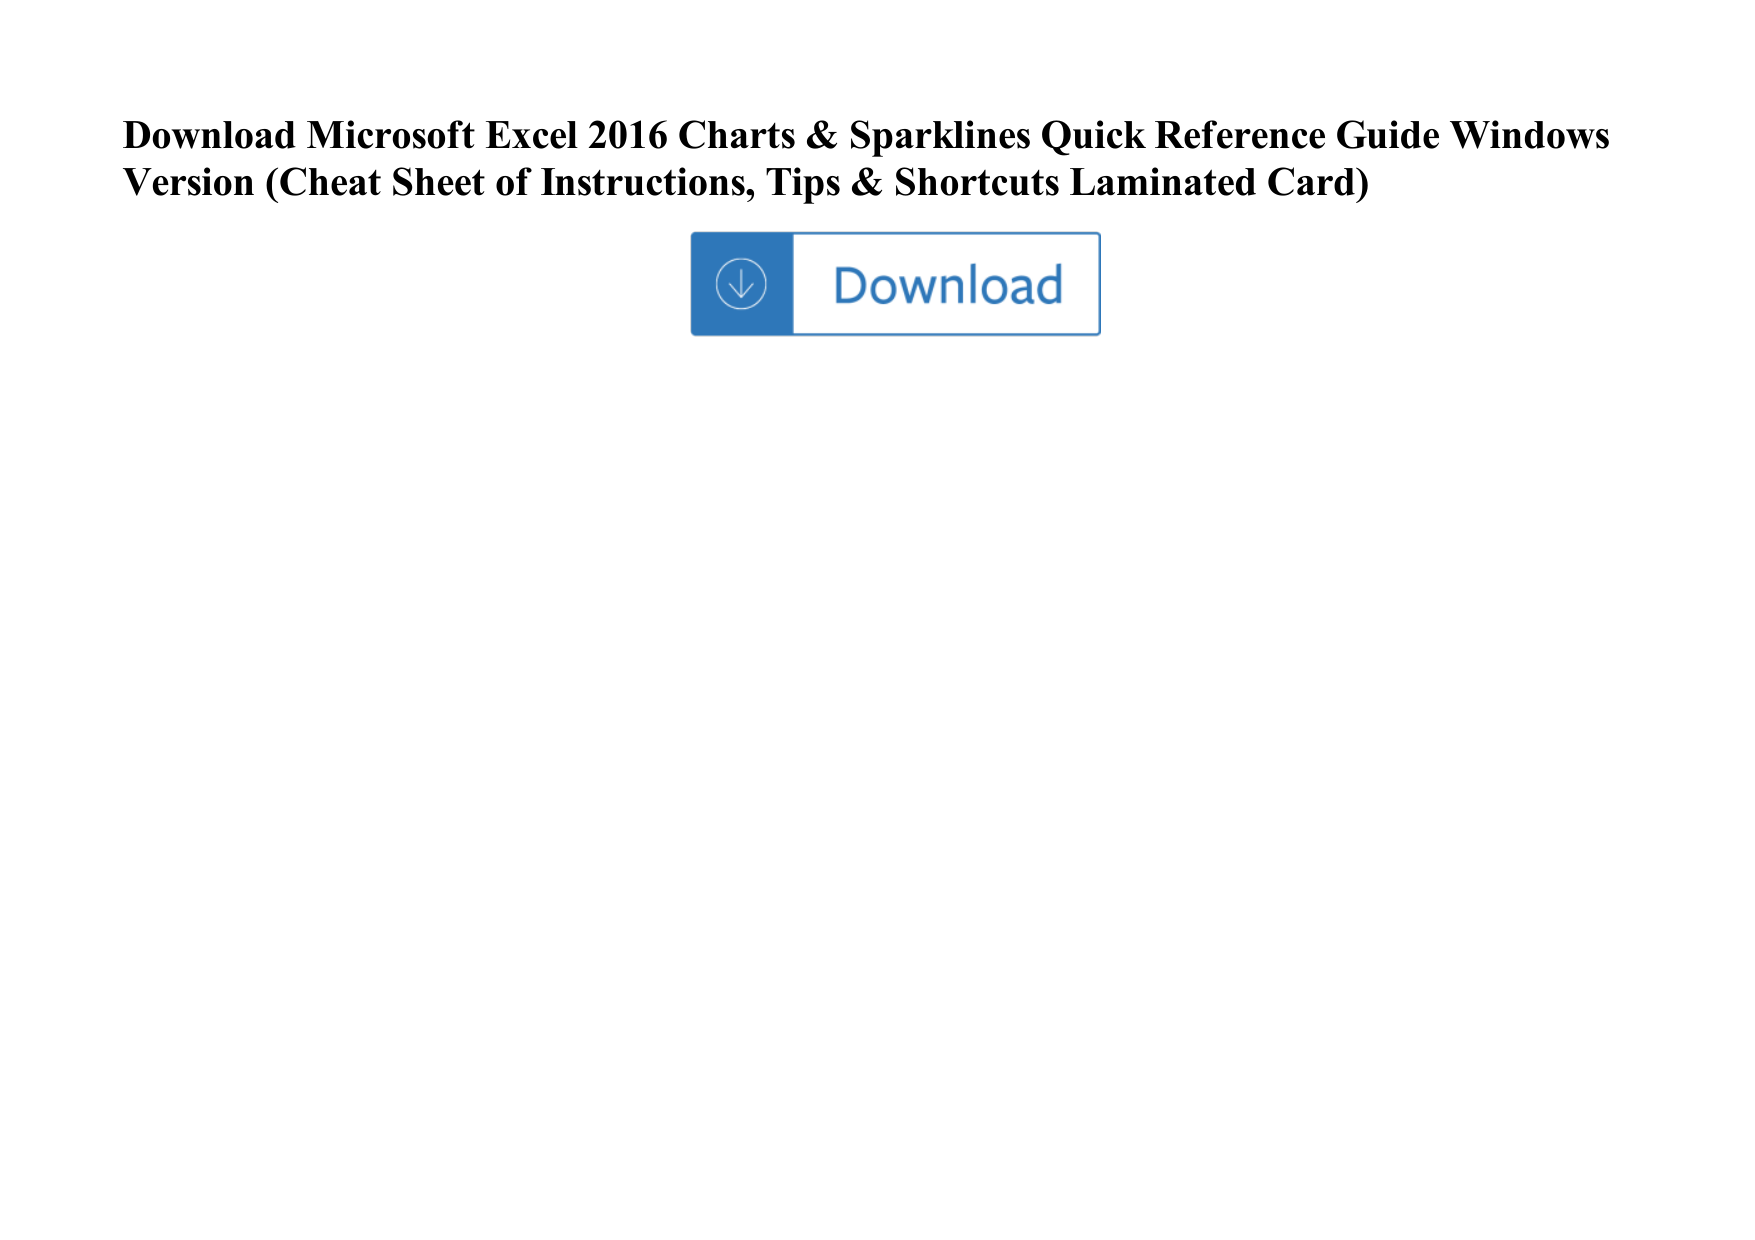 Page 1 of 1 - Microsoft Excel 2016 Charts & Sparklines Quick Reference Guide  Windows Version (Cheat Sheet Of Instructions, Tips Sh Microsoft-excel-2016-charts-sparklines-quick-reference-guide-windows-version-cheat-sheet-of-instructions-tips-shortcuts-laminate